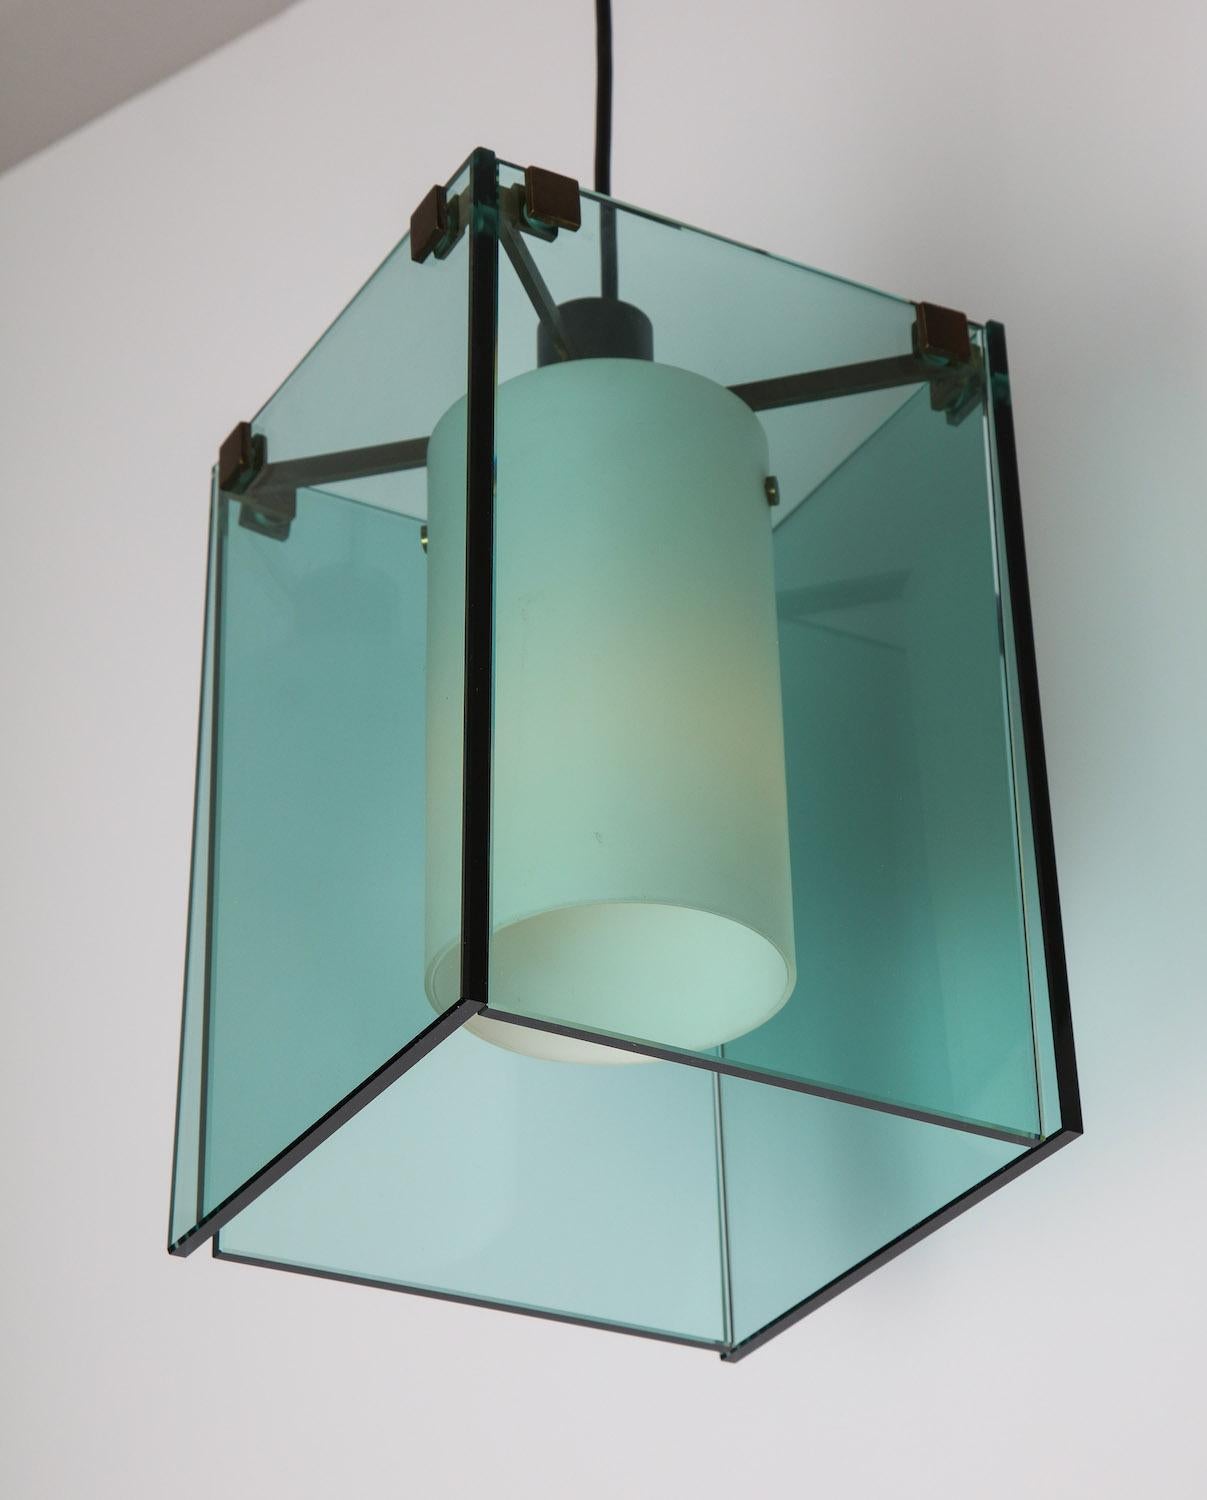 #2211 pendant by Max Ingrand for Fontana Arte. 4 x colored glass panels, frosted glass tube-shade, brass mounts. 1 x large Edison socket. Removable ceiling plate has been made to cover US j-box. Overall drop can be easily adjusted. H. 13” W. 8.25”